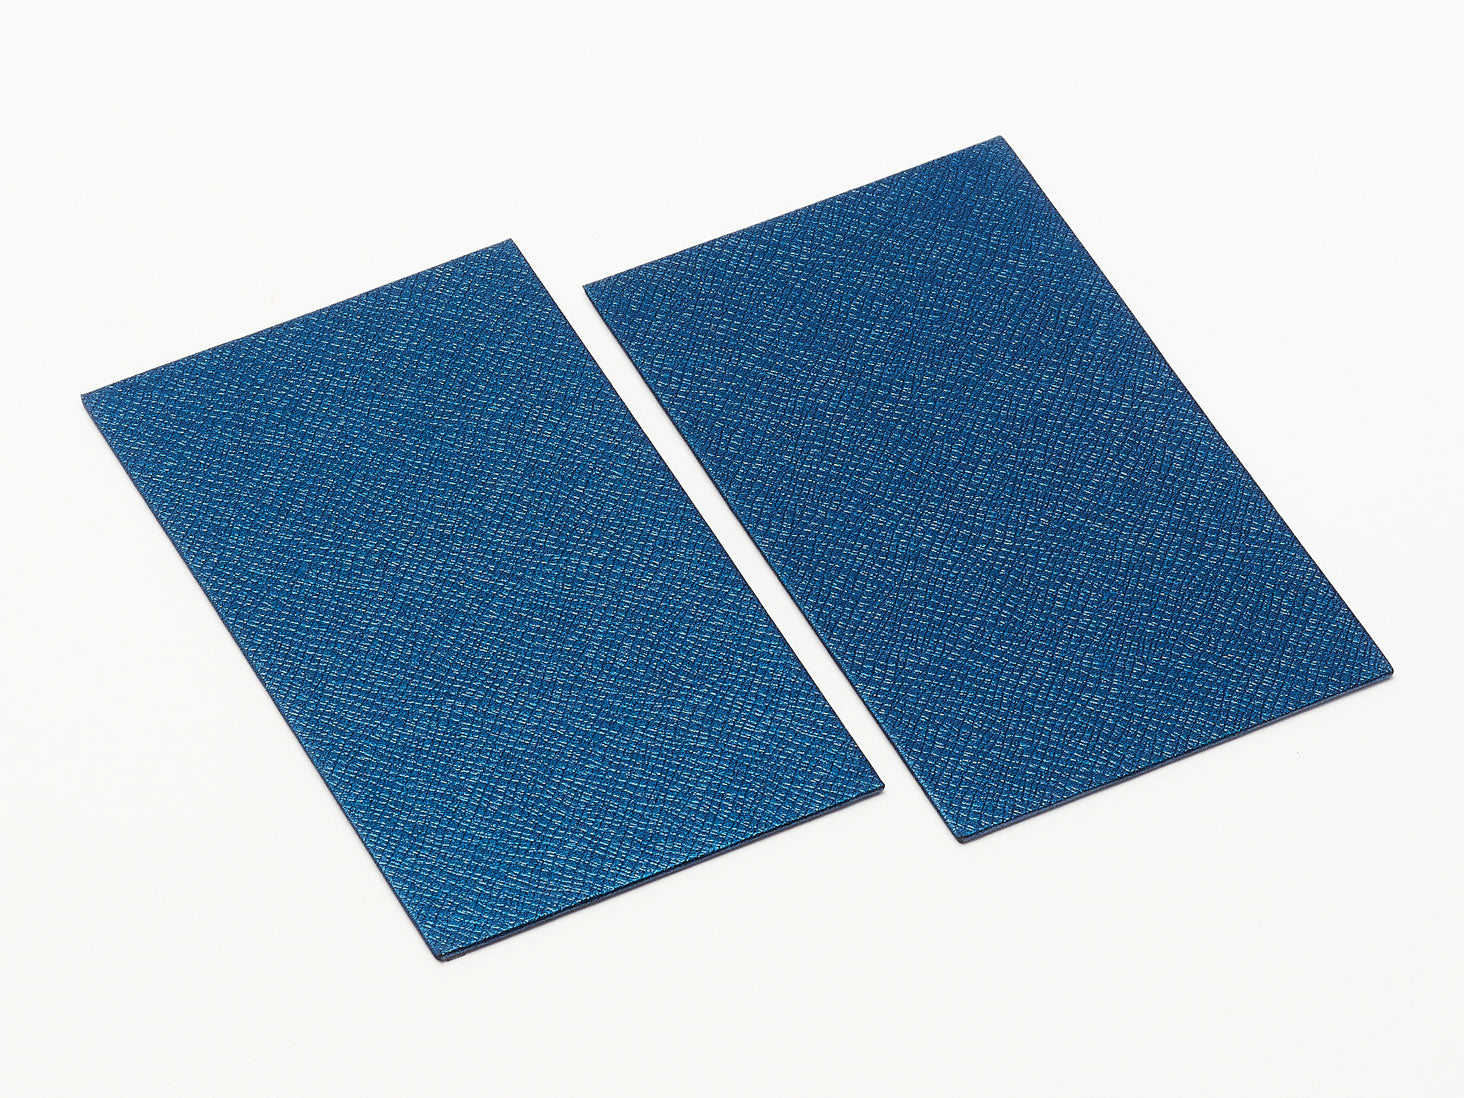 Sample Navy Textured FAB Sides® Decorative Side Panels A5 Deep